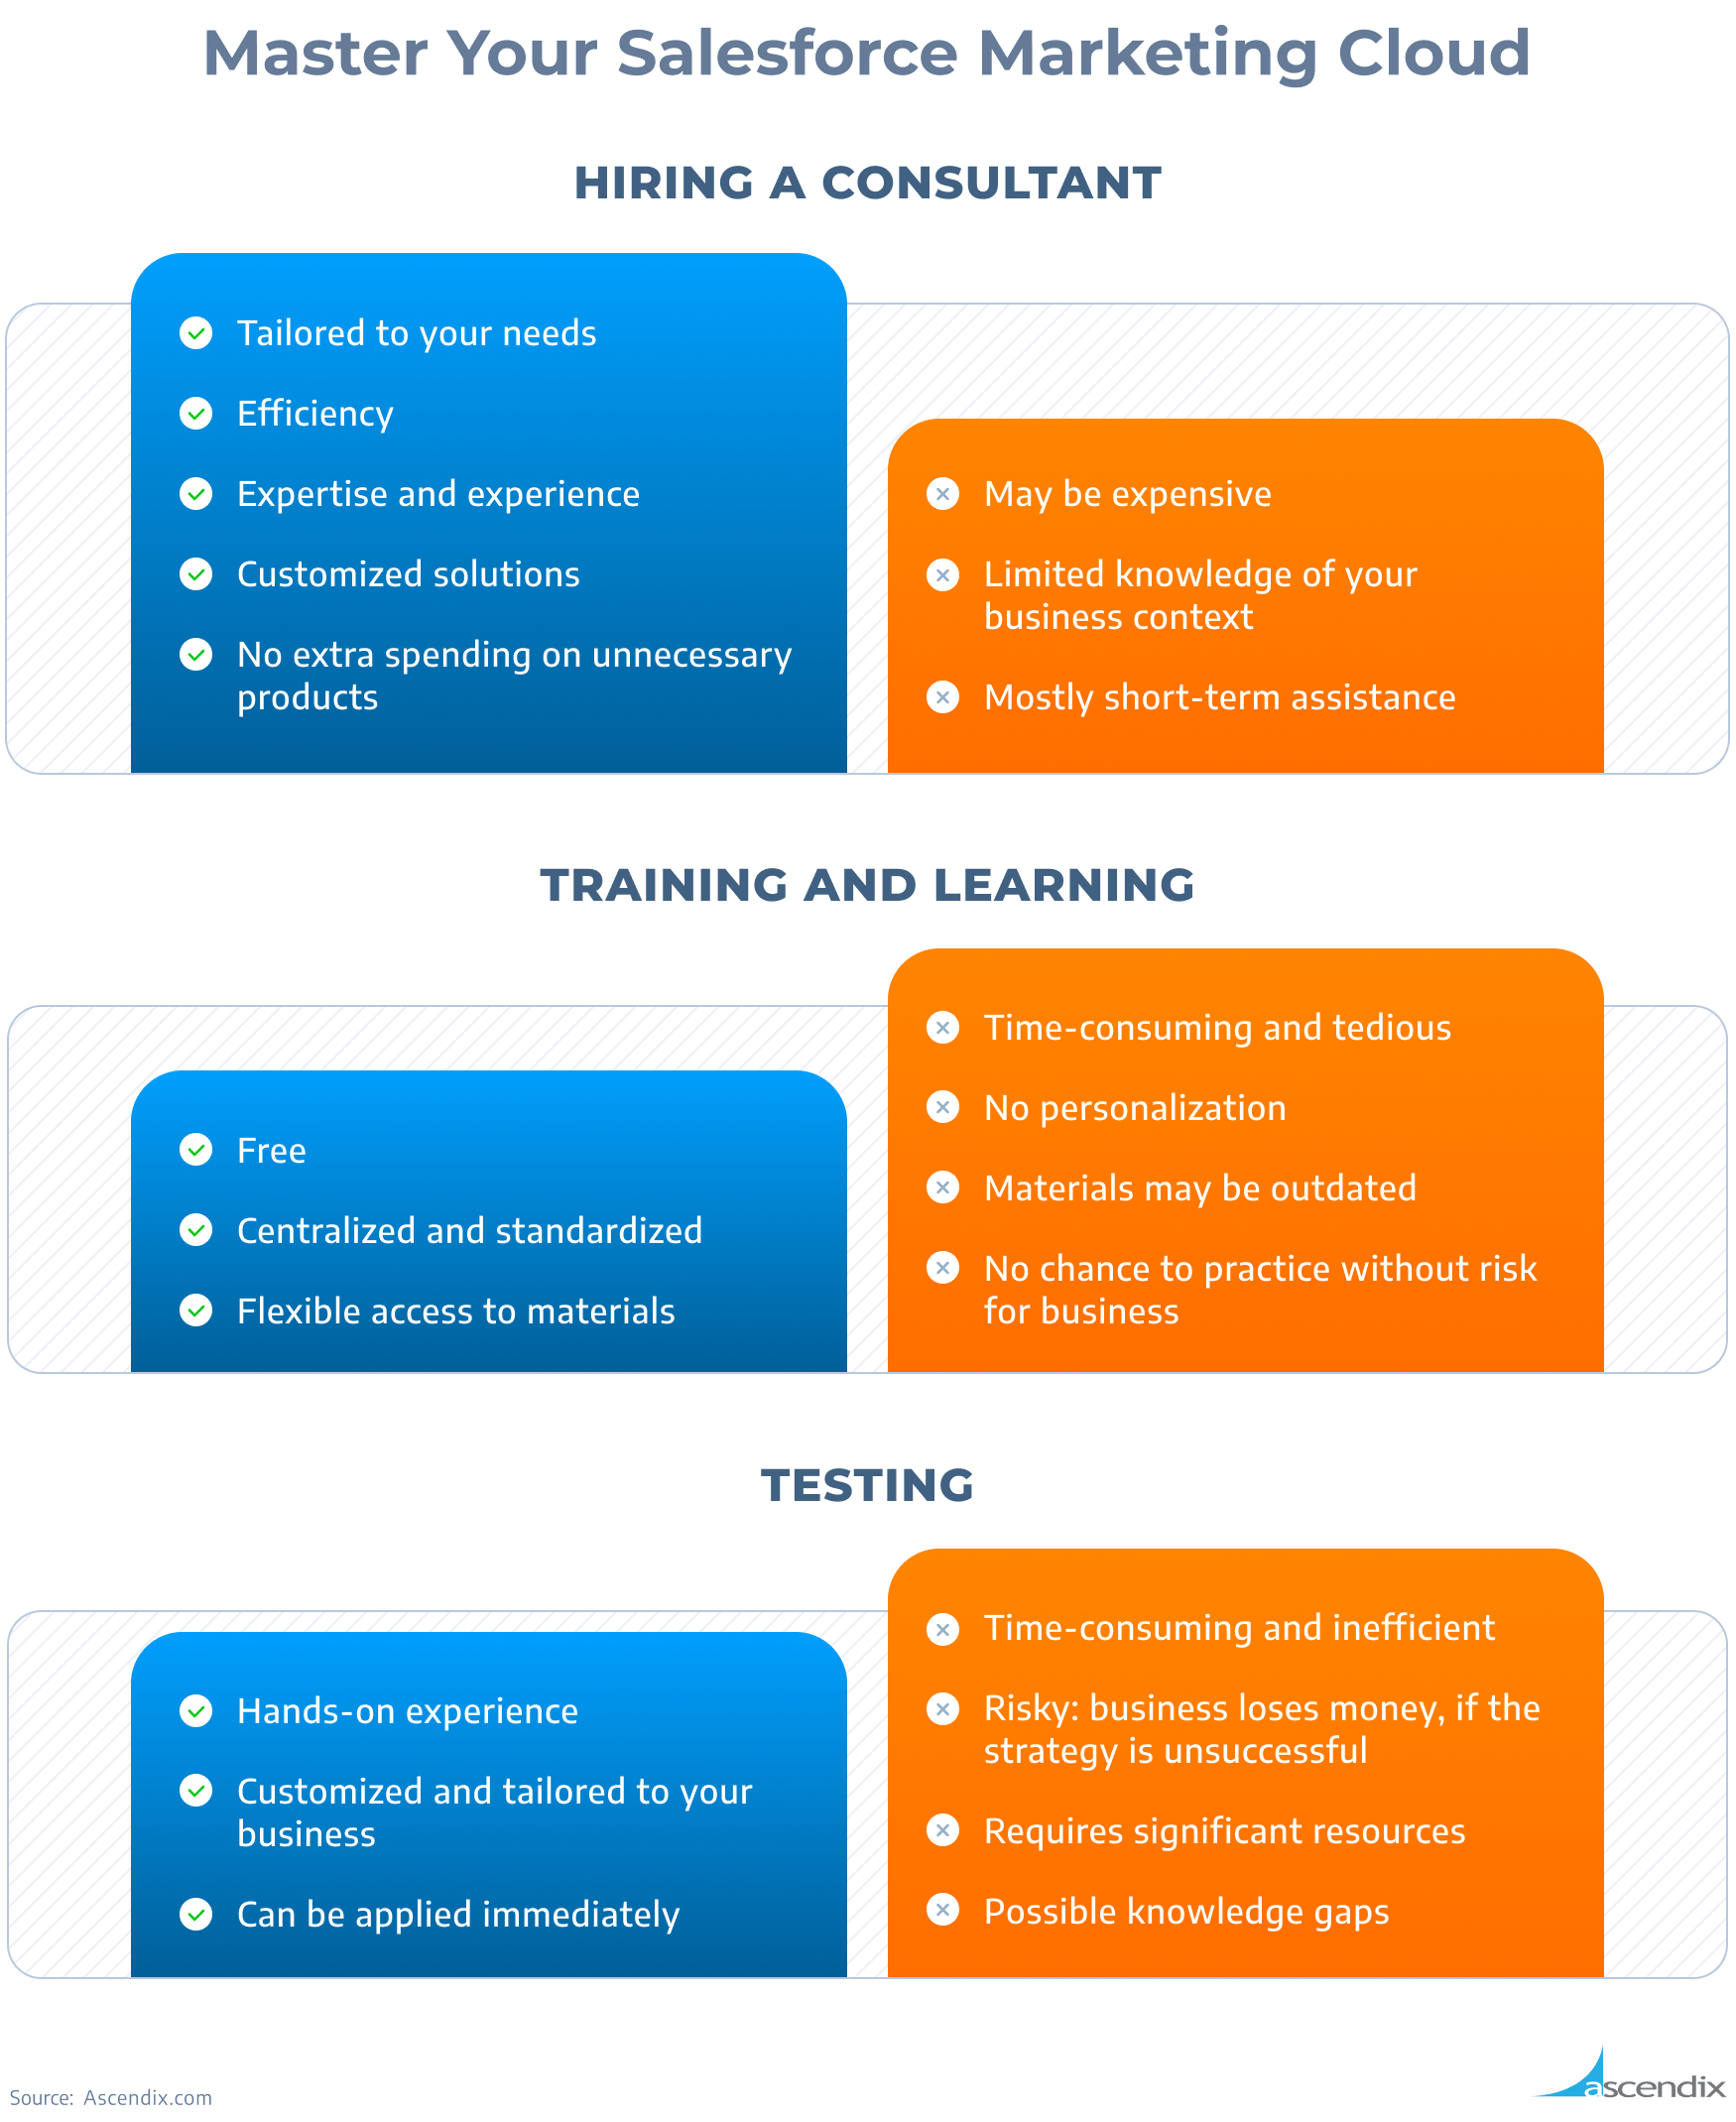 image showing the comparison between benefits of hiring a salesforce consultant, testing strategies, and training the team to use salesforce marketing cloud features